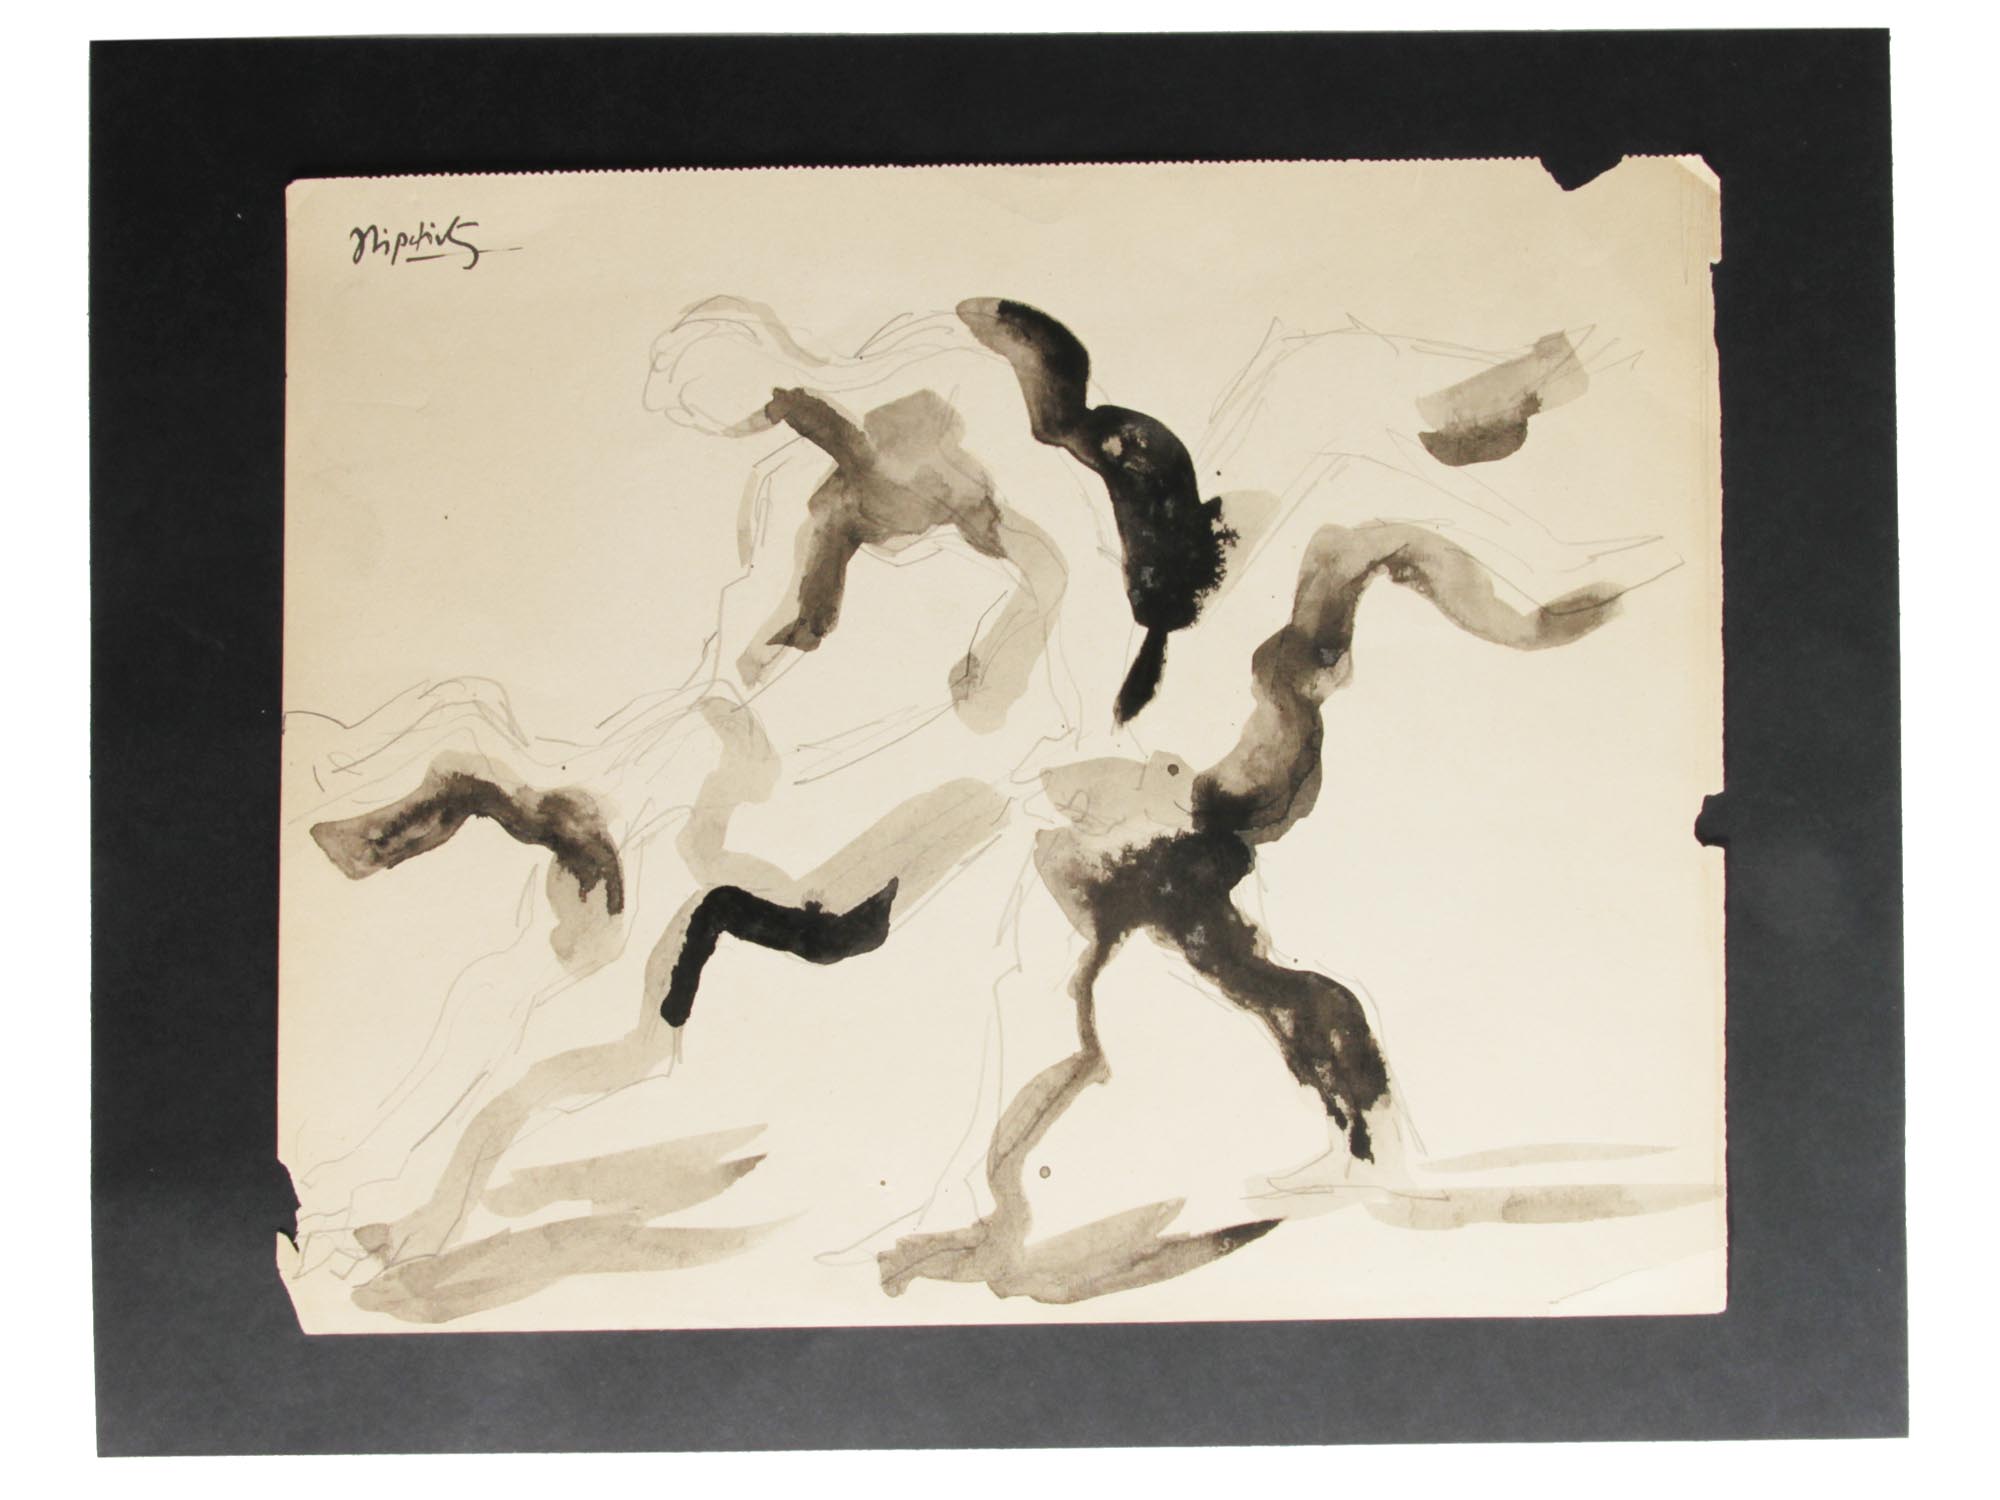 A JACQUES LIPCHITZ ORIGINAL INK ON PAPER PAINTING PIC-0